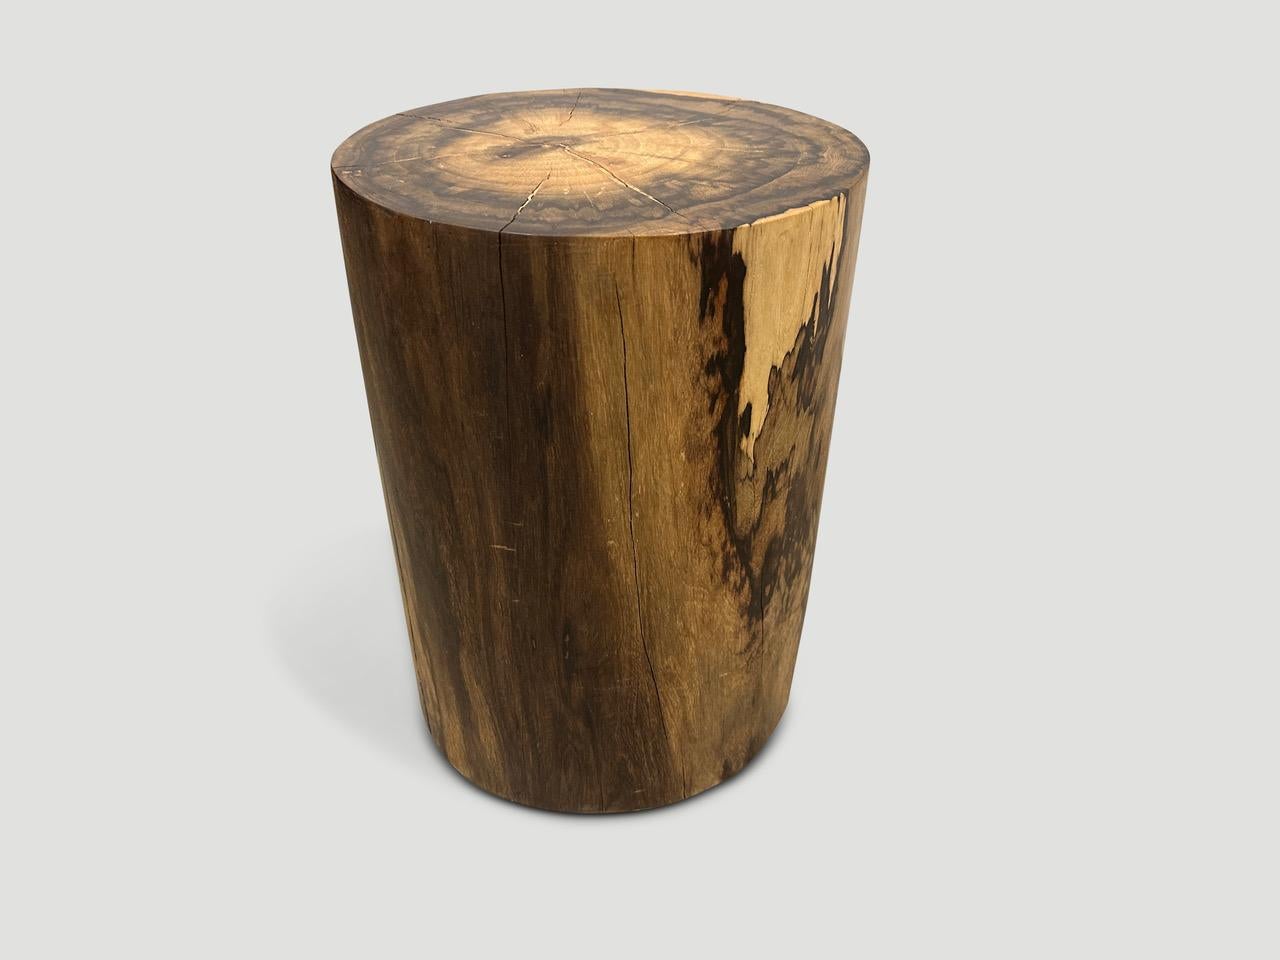 Organic Modern Andrianna Shamaris Exquisite Rosewood Side Table or Stool For Sale